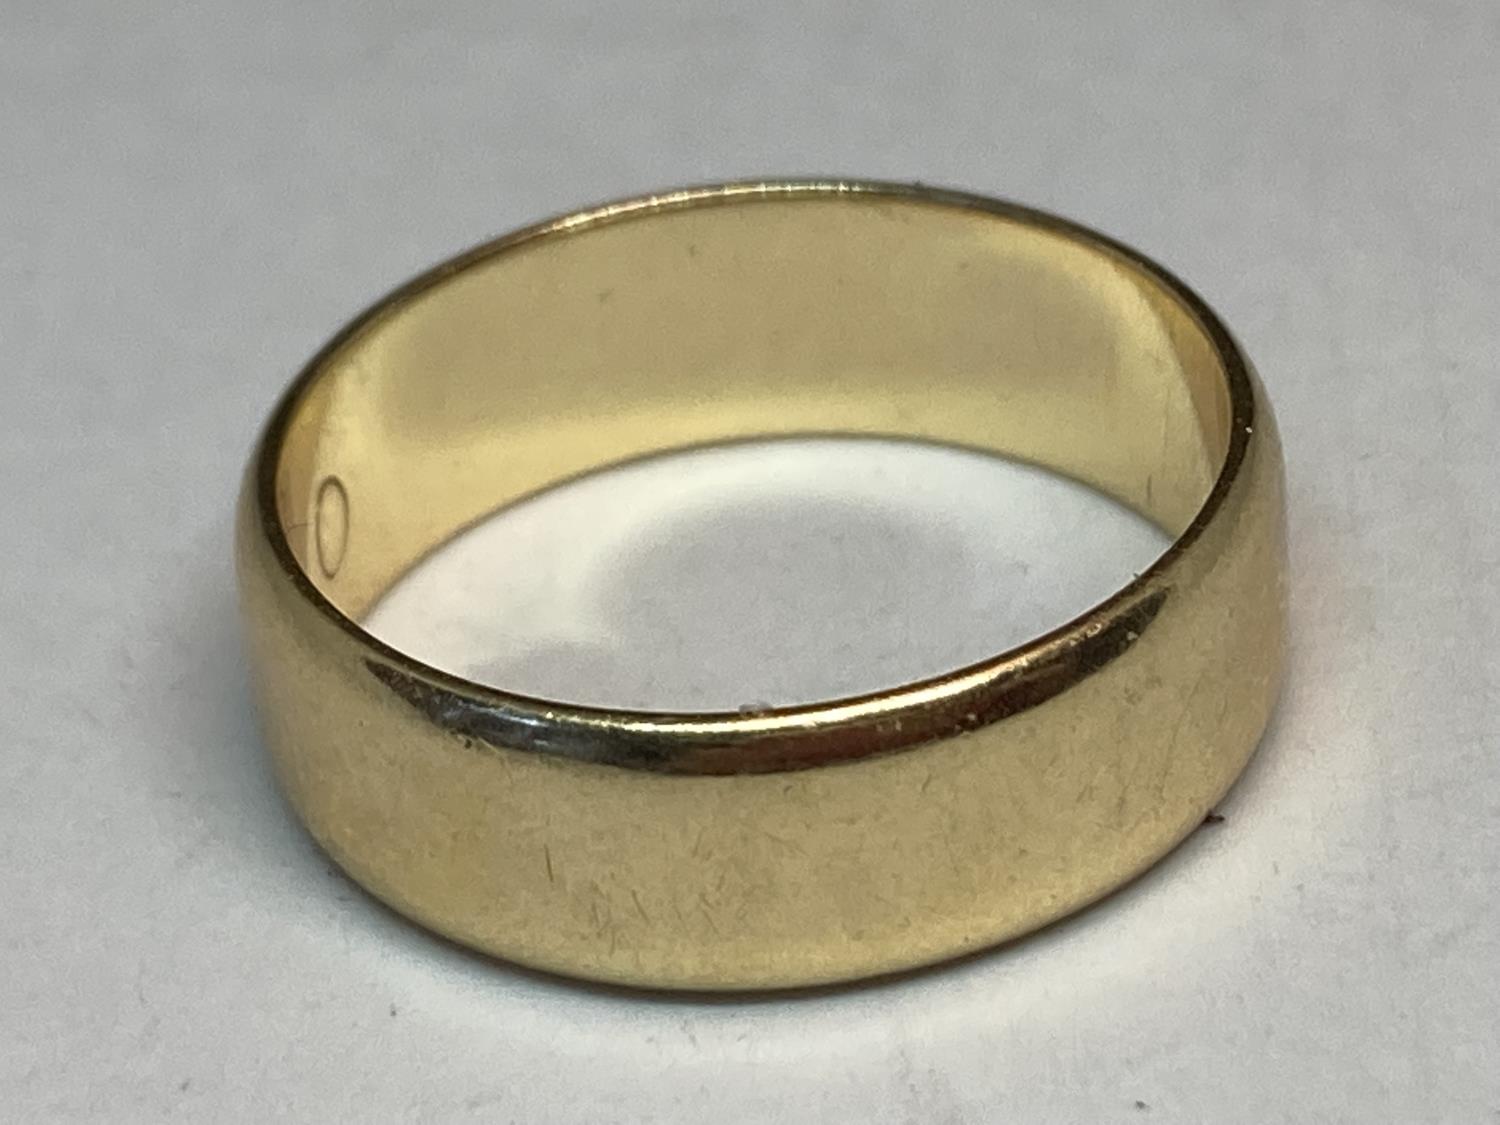 AN 18 CARAT YELLOW GOLD WEDDING BAND SIZE O GROSS WEIGHT 5.09 GRAMS - Image 2 of 6